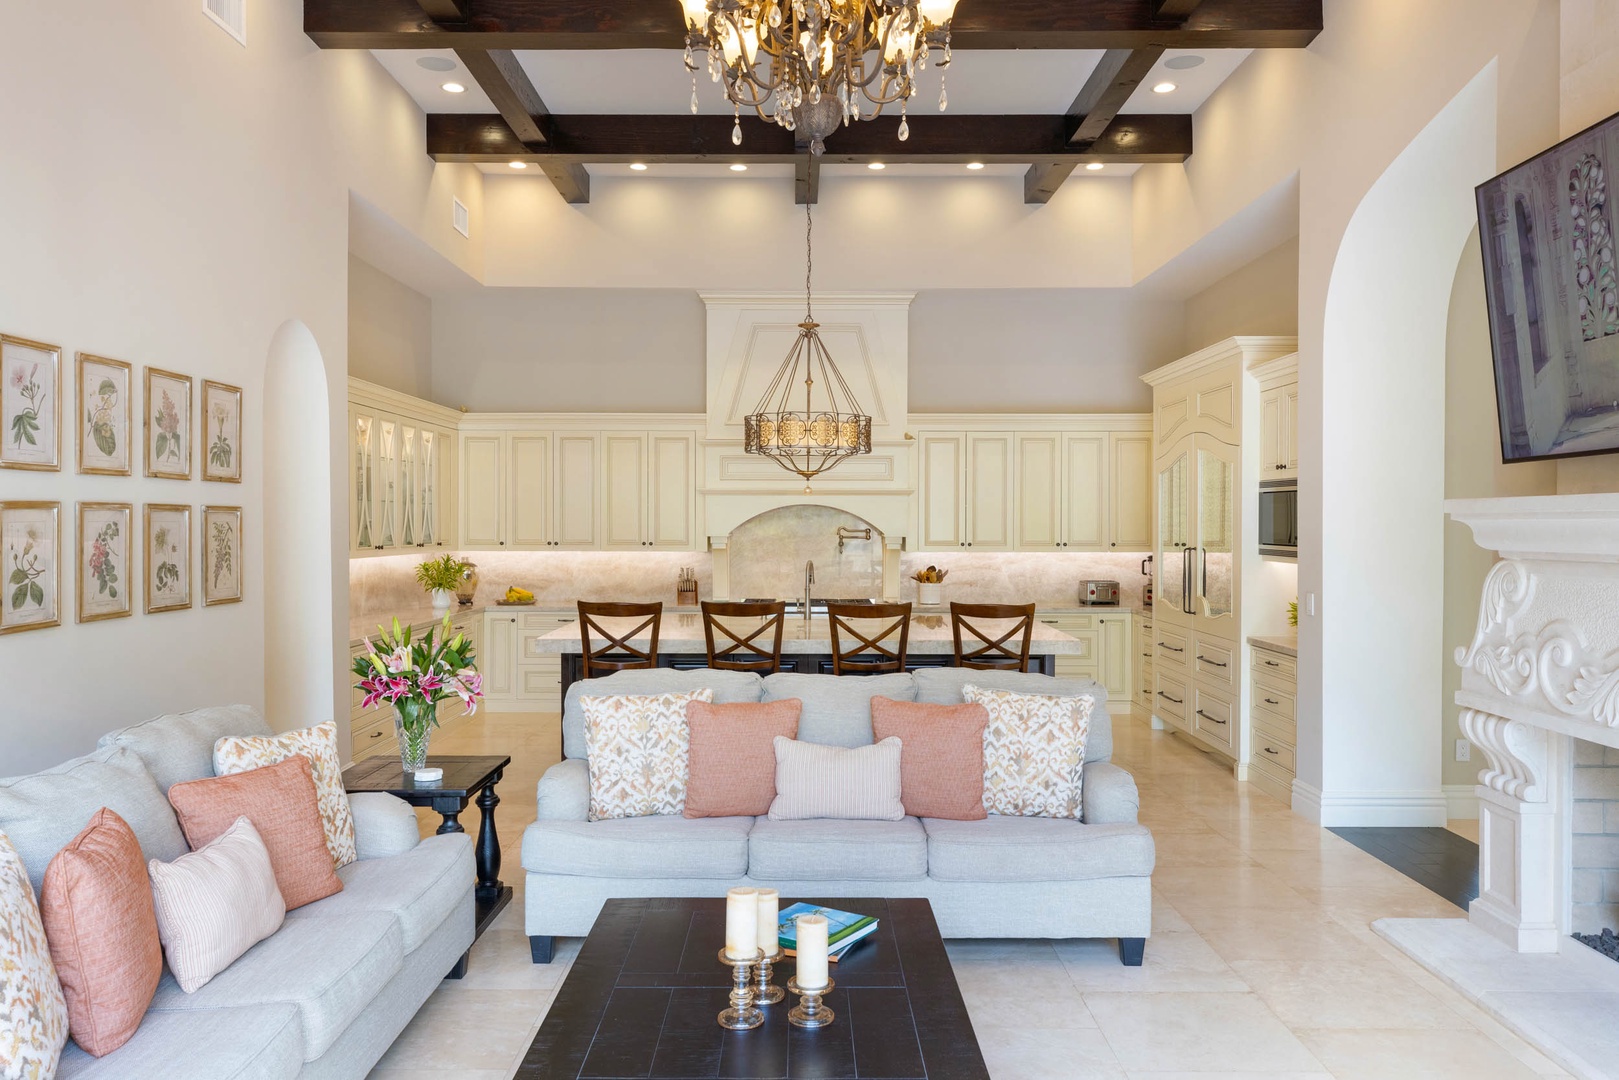 Honolulu Vacation Rentals, The Kahala Mansion - This elegant and luxurious home provides space for all guests to connect.